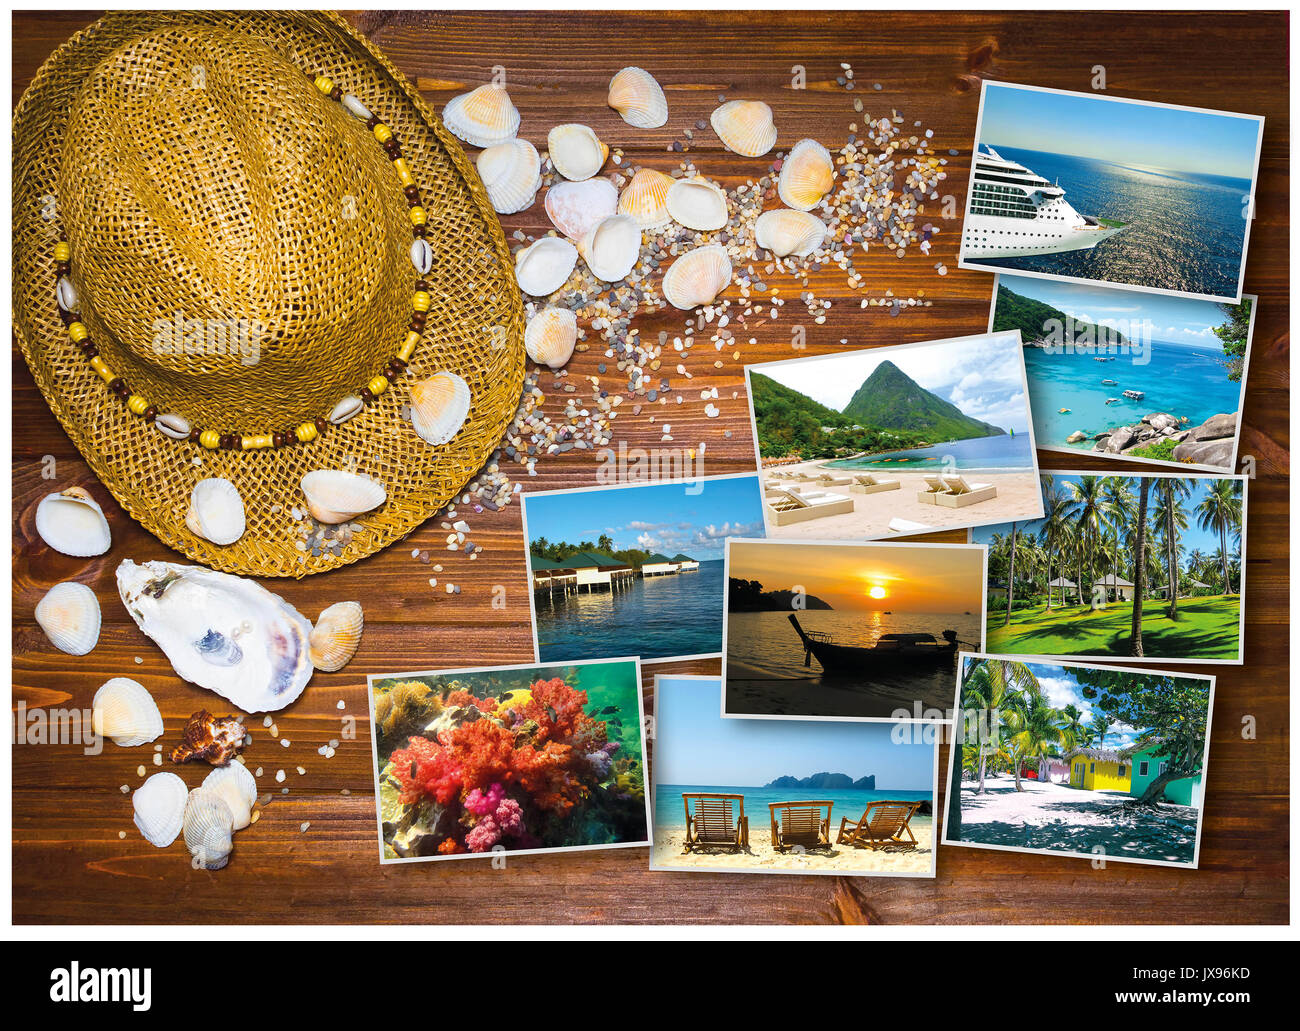 The travel, tourism concept - collage of Thailand images Stock Photo